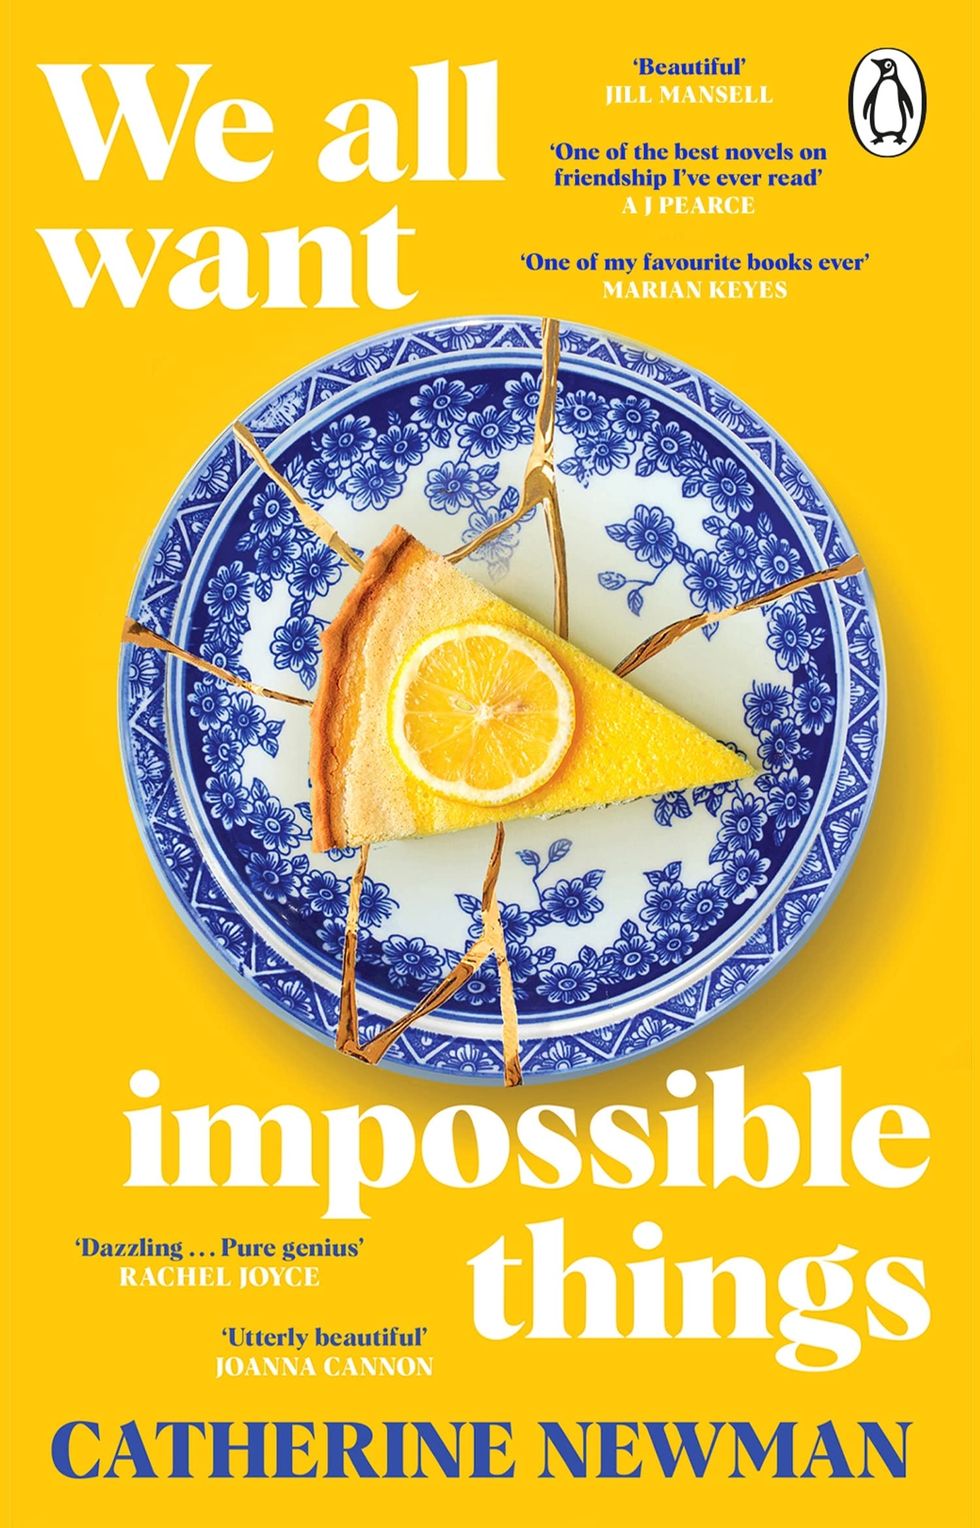 We All Want Impossible Things  by Catherine Newman (Penguin)